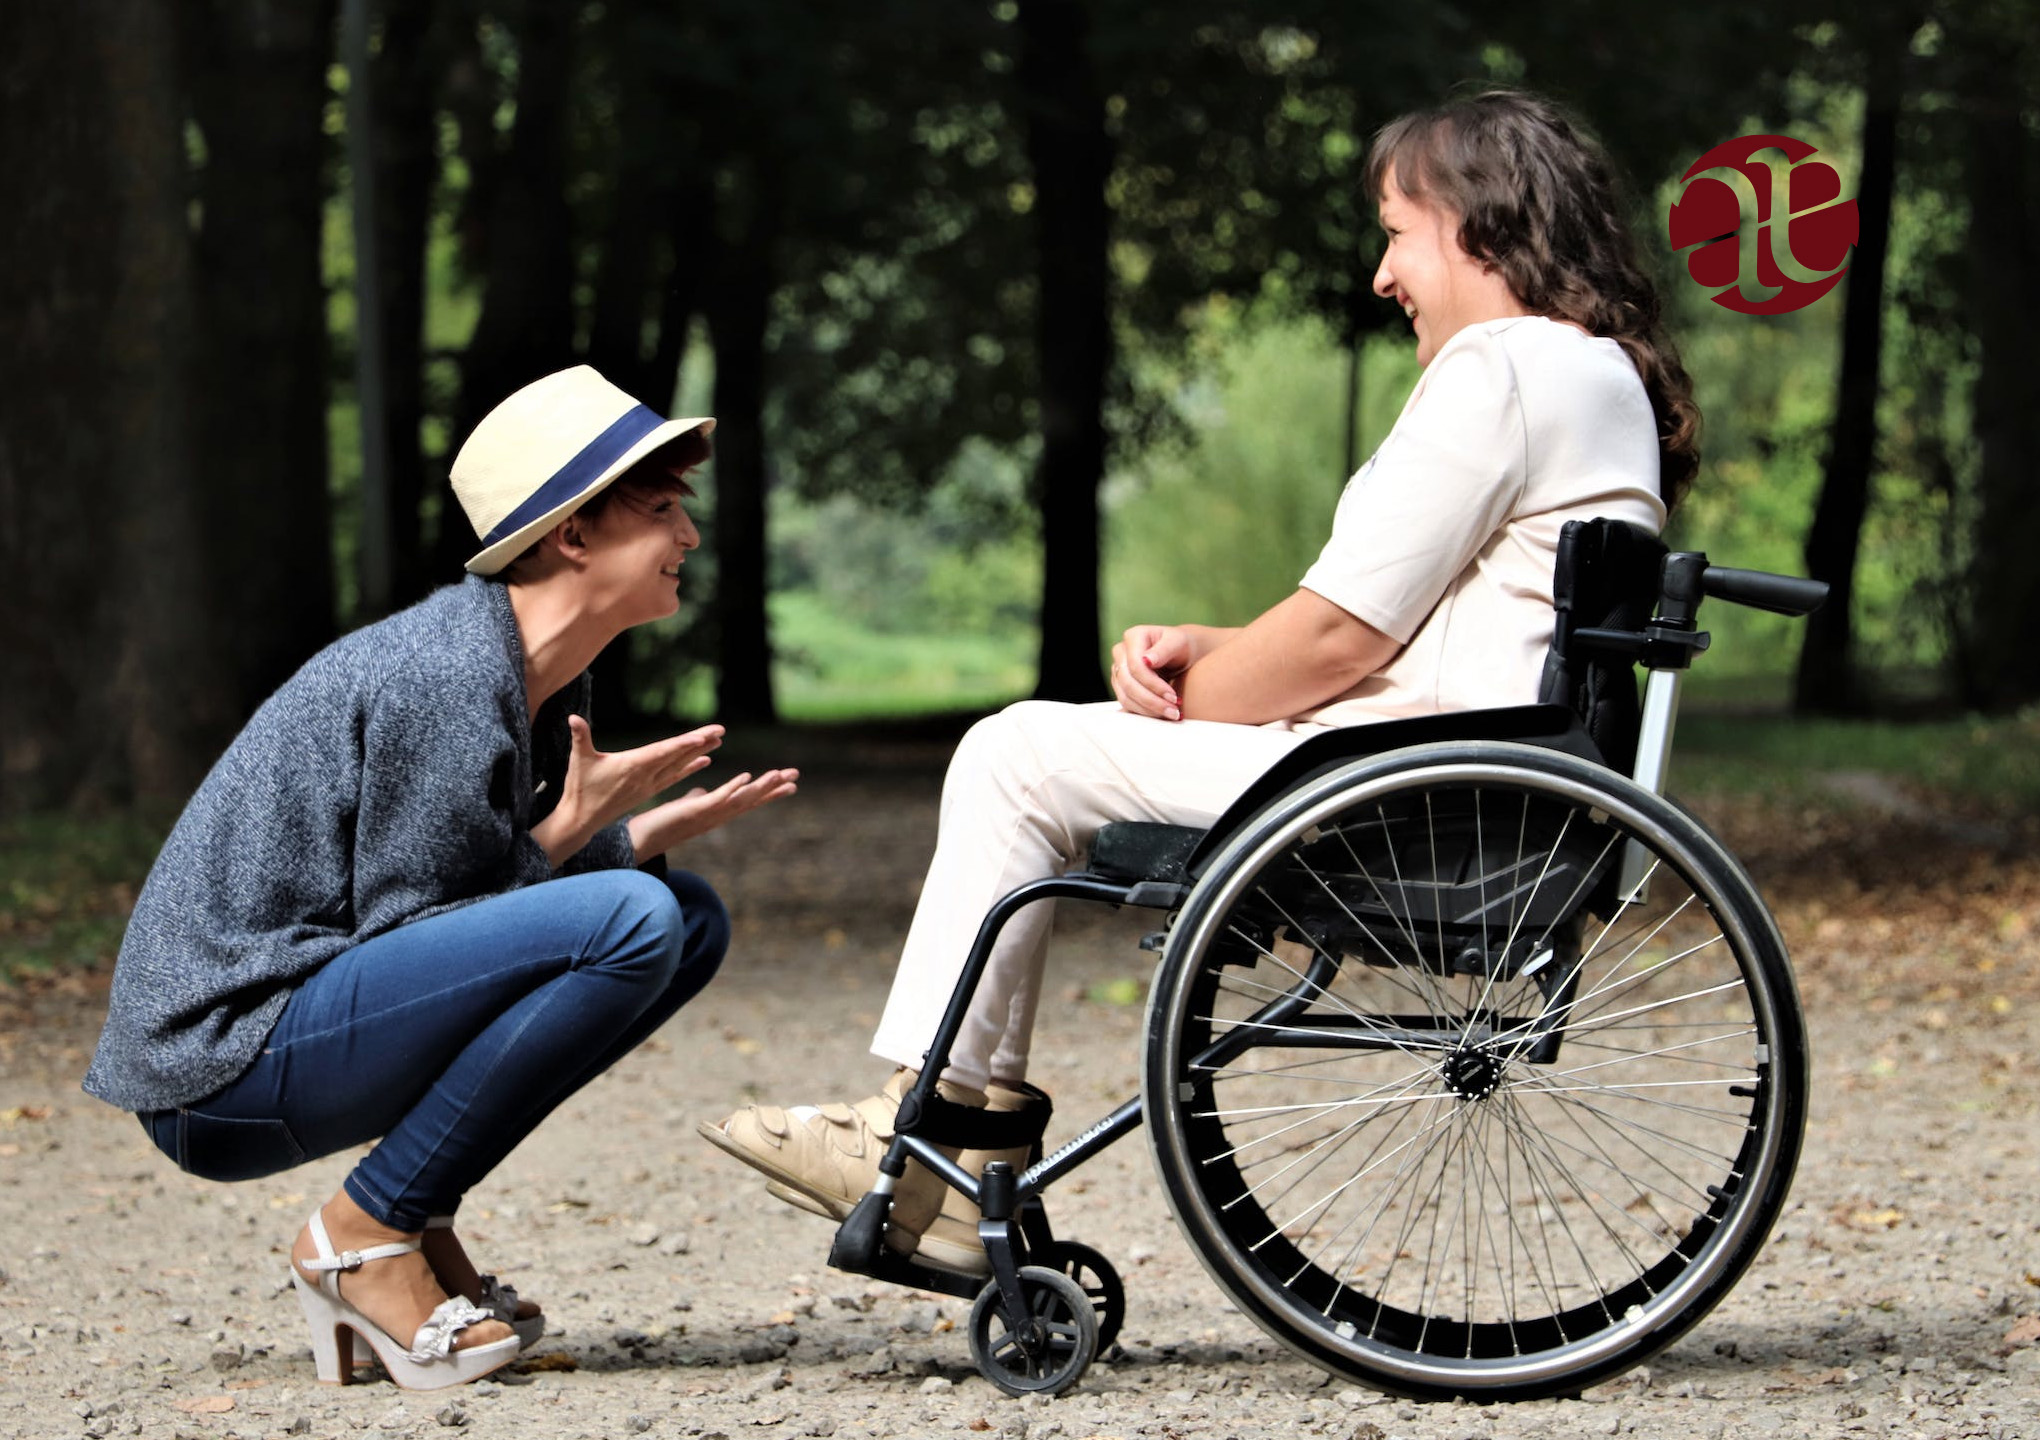 Are You Caring for a Disabled Family Member? Read This.